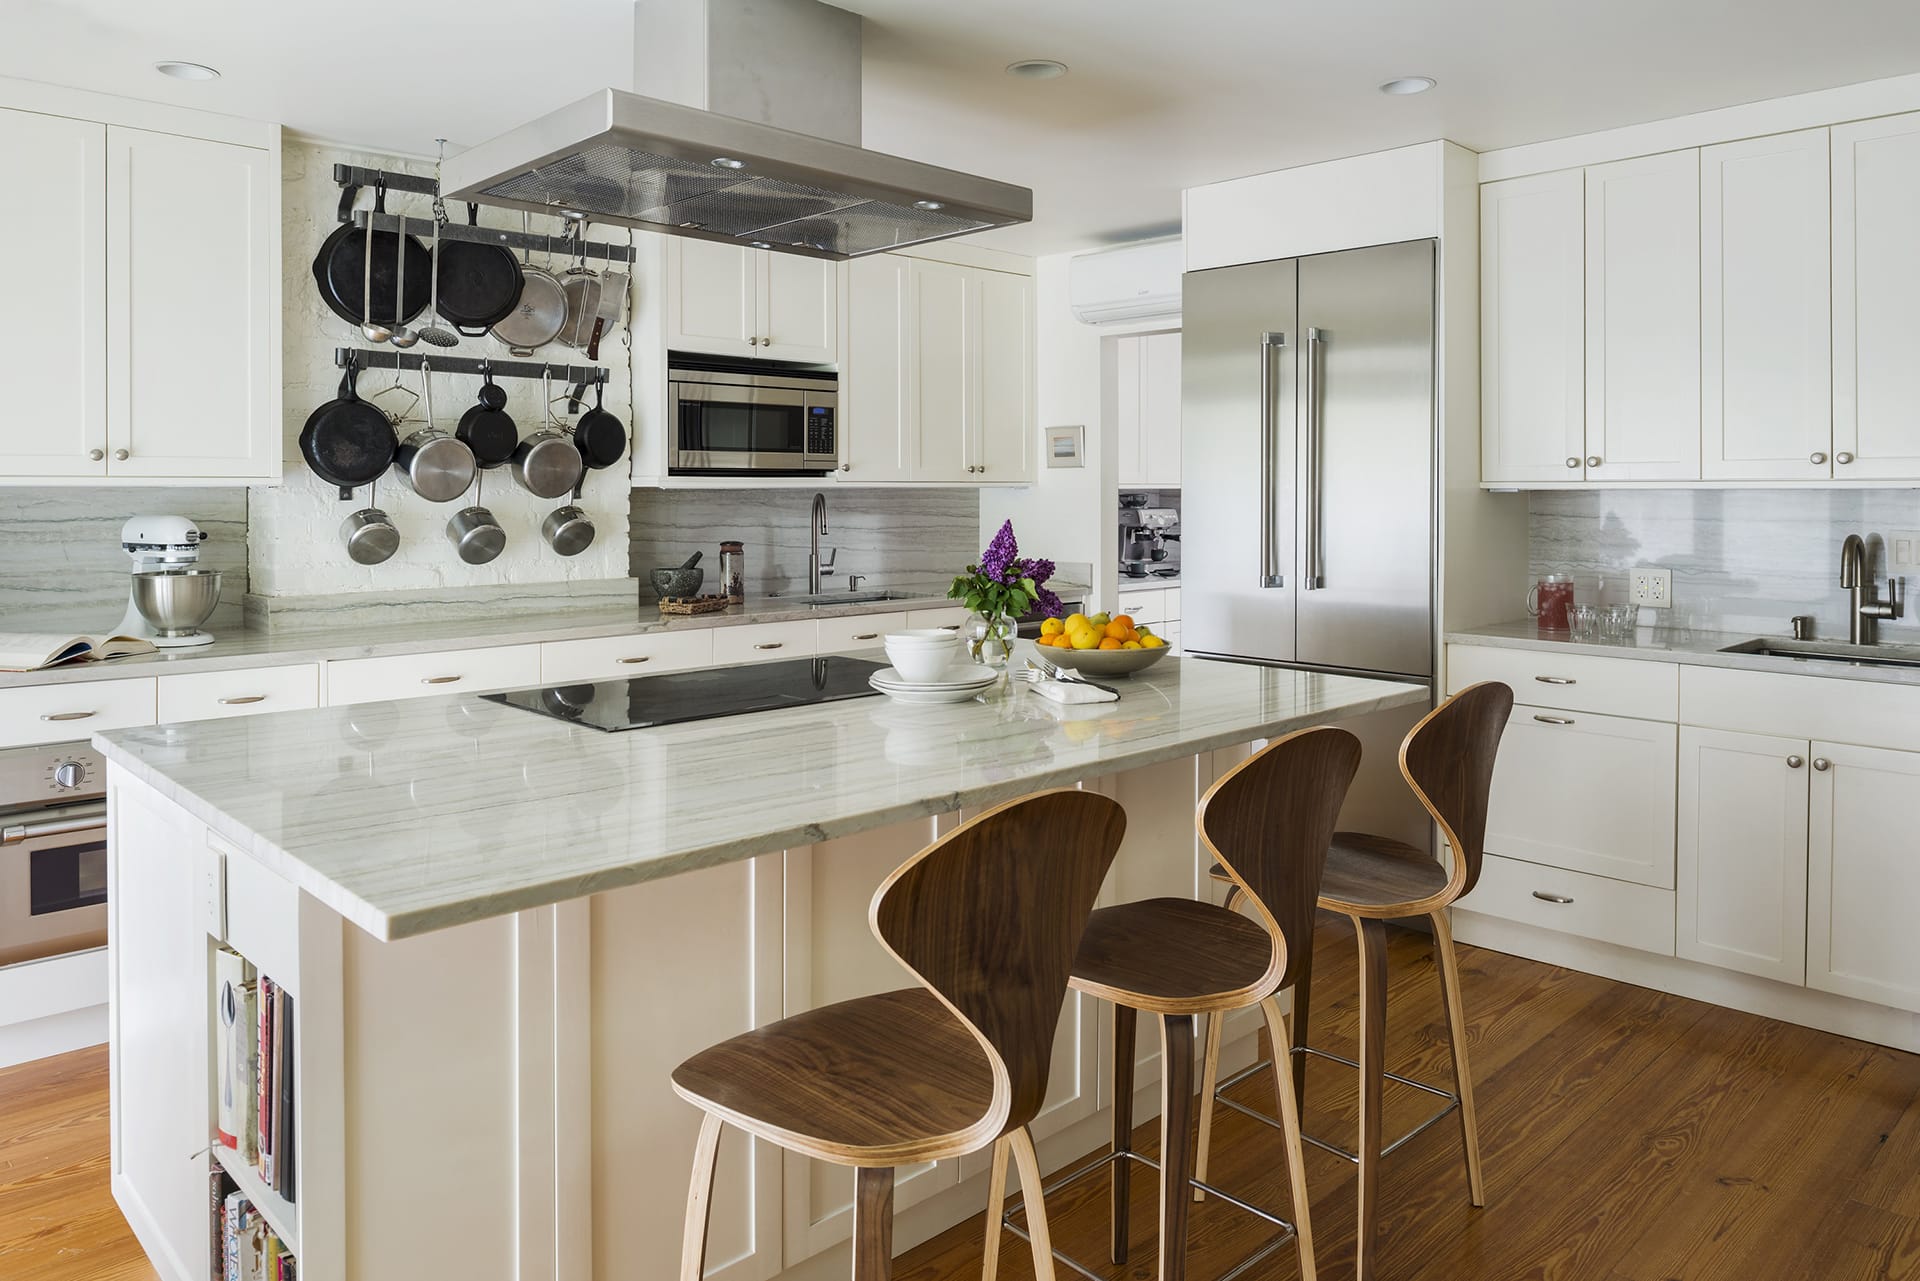 Garden-level kitchen in a Brooklyn townhouse. Range hood over the stove in the island, white millwork, brown barstools